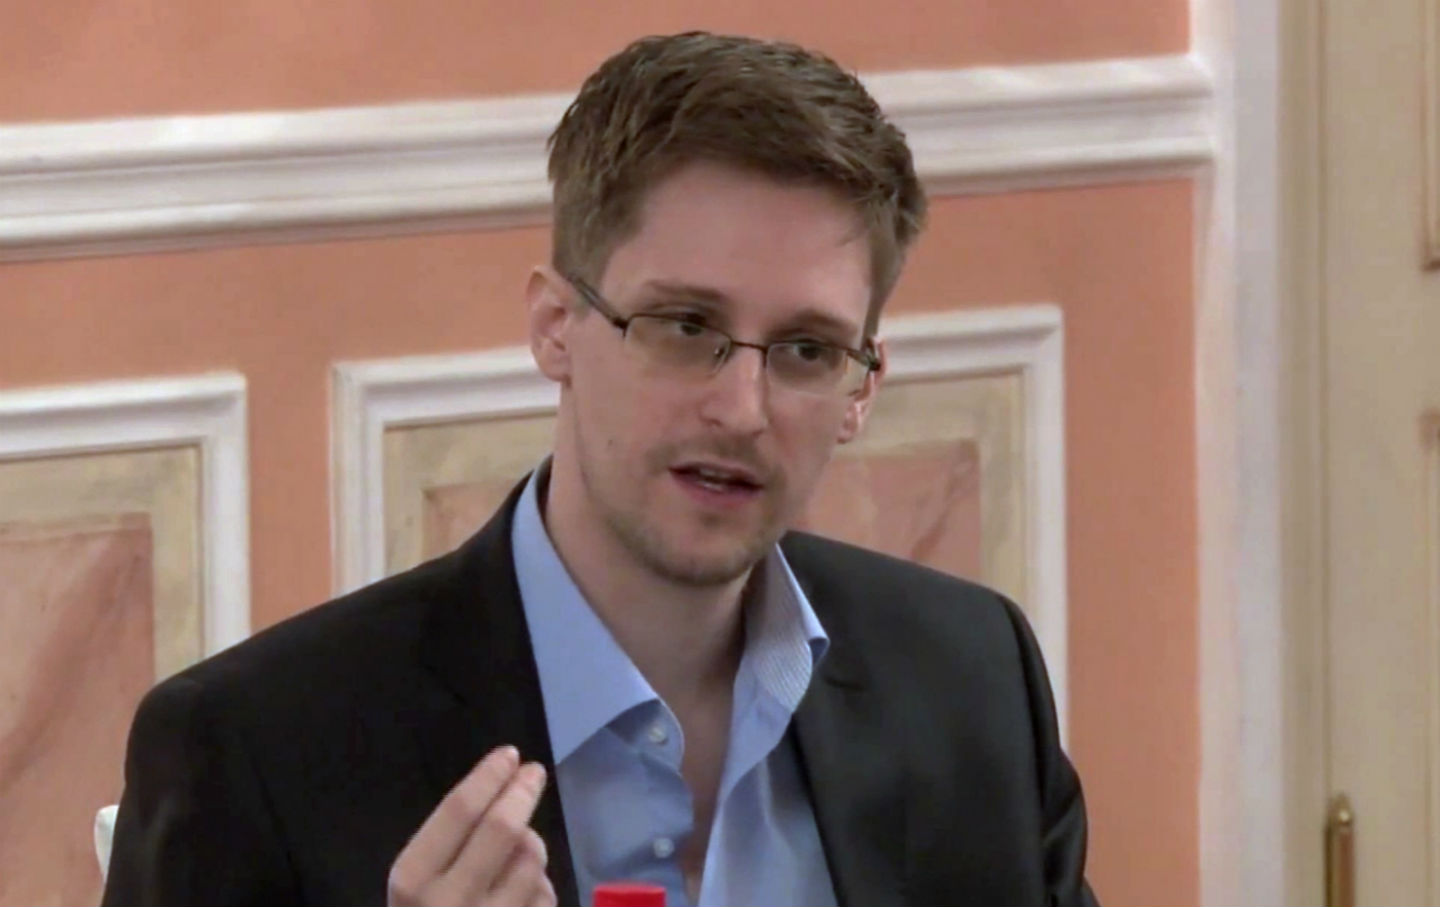 Edward Snowden Is the Perfect Candidate for a Presidential Pardon